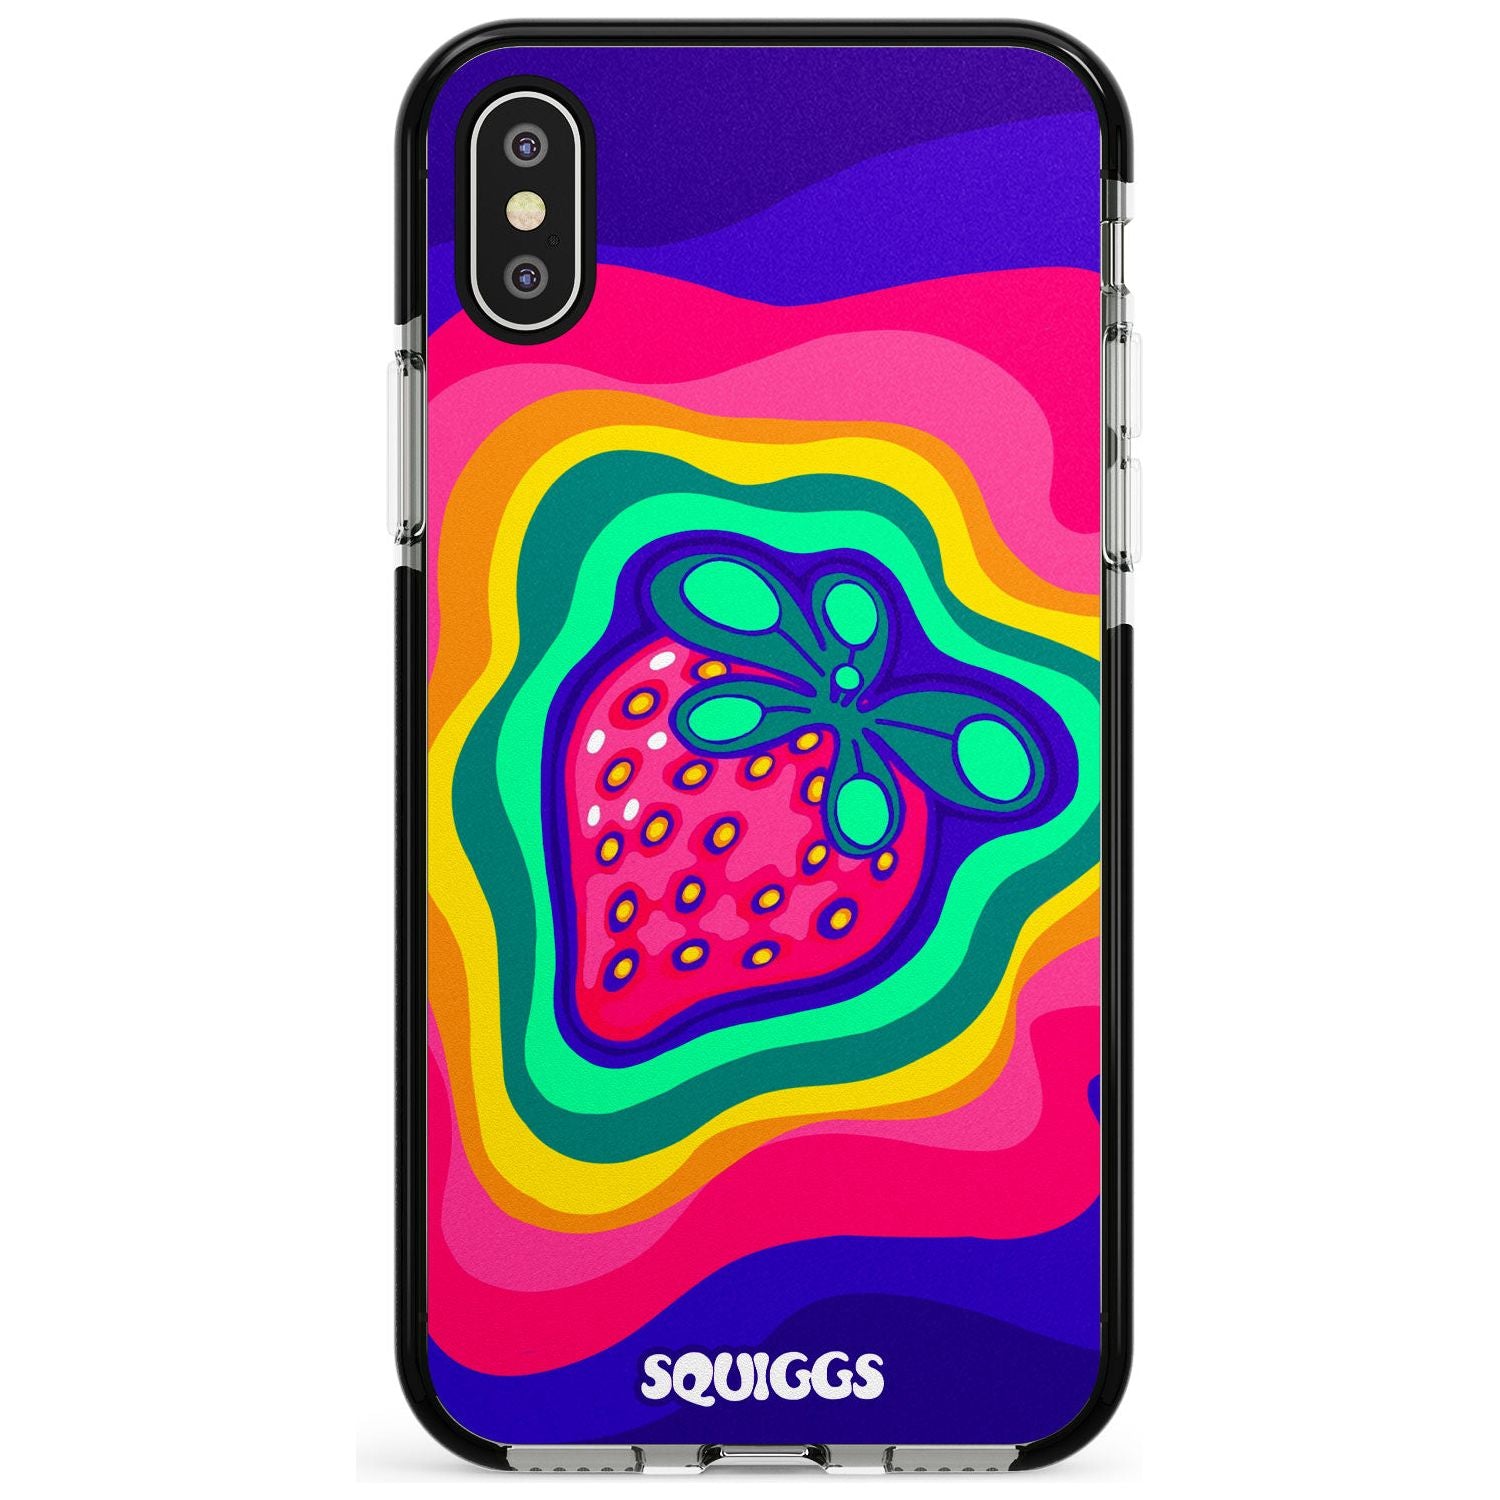 Strawberry Rainbow Pink Fade Impact Phone Case for iPhone X XS Max XR